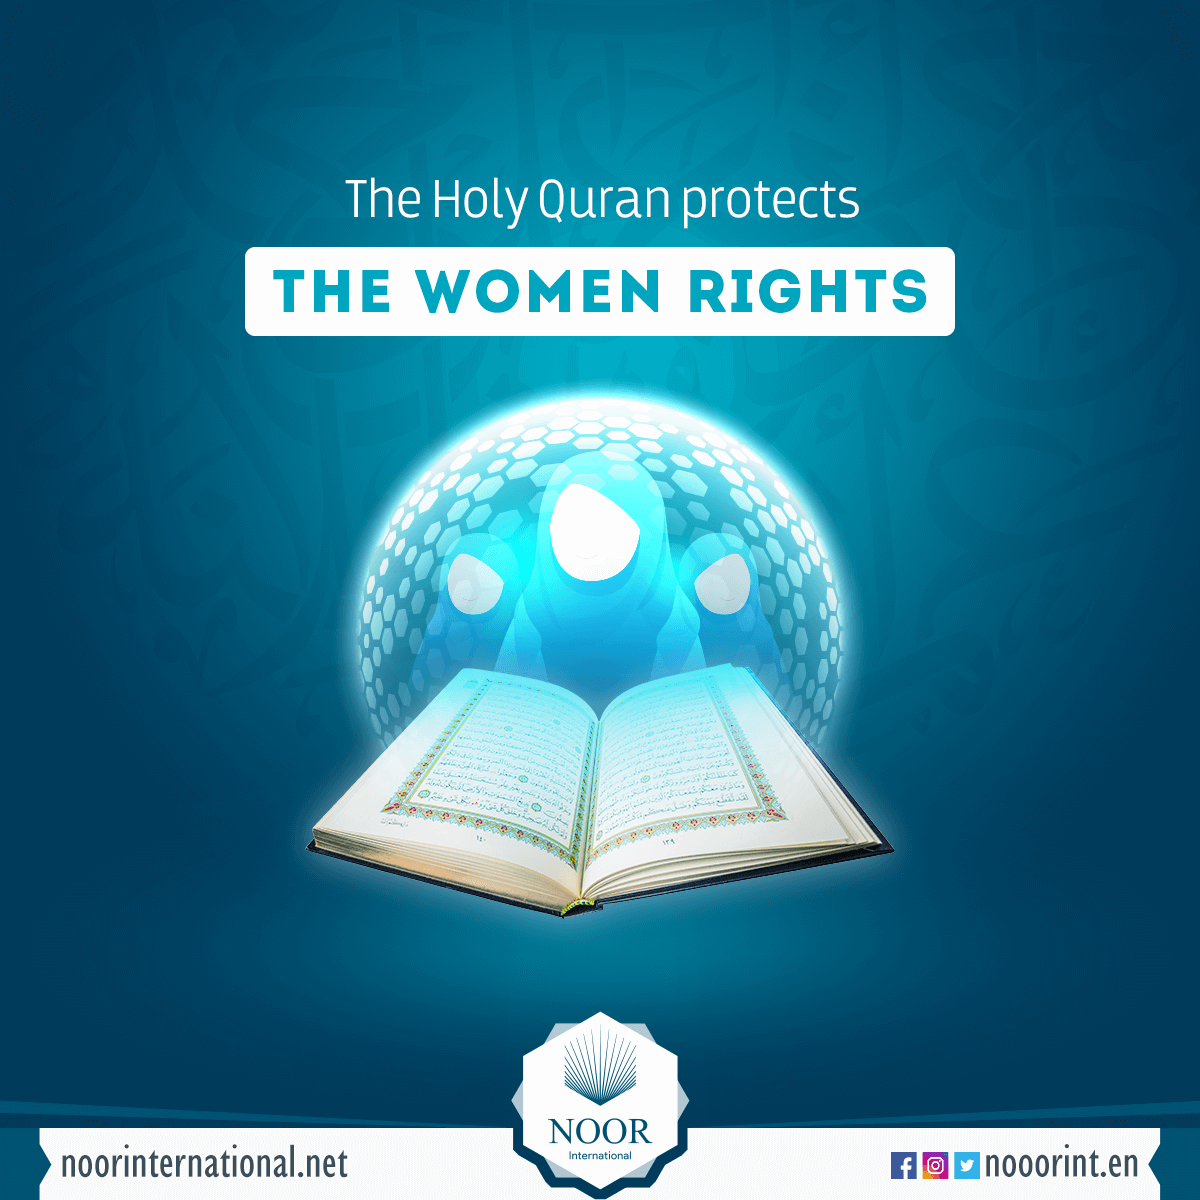 The Holy Quran protects the women rights